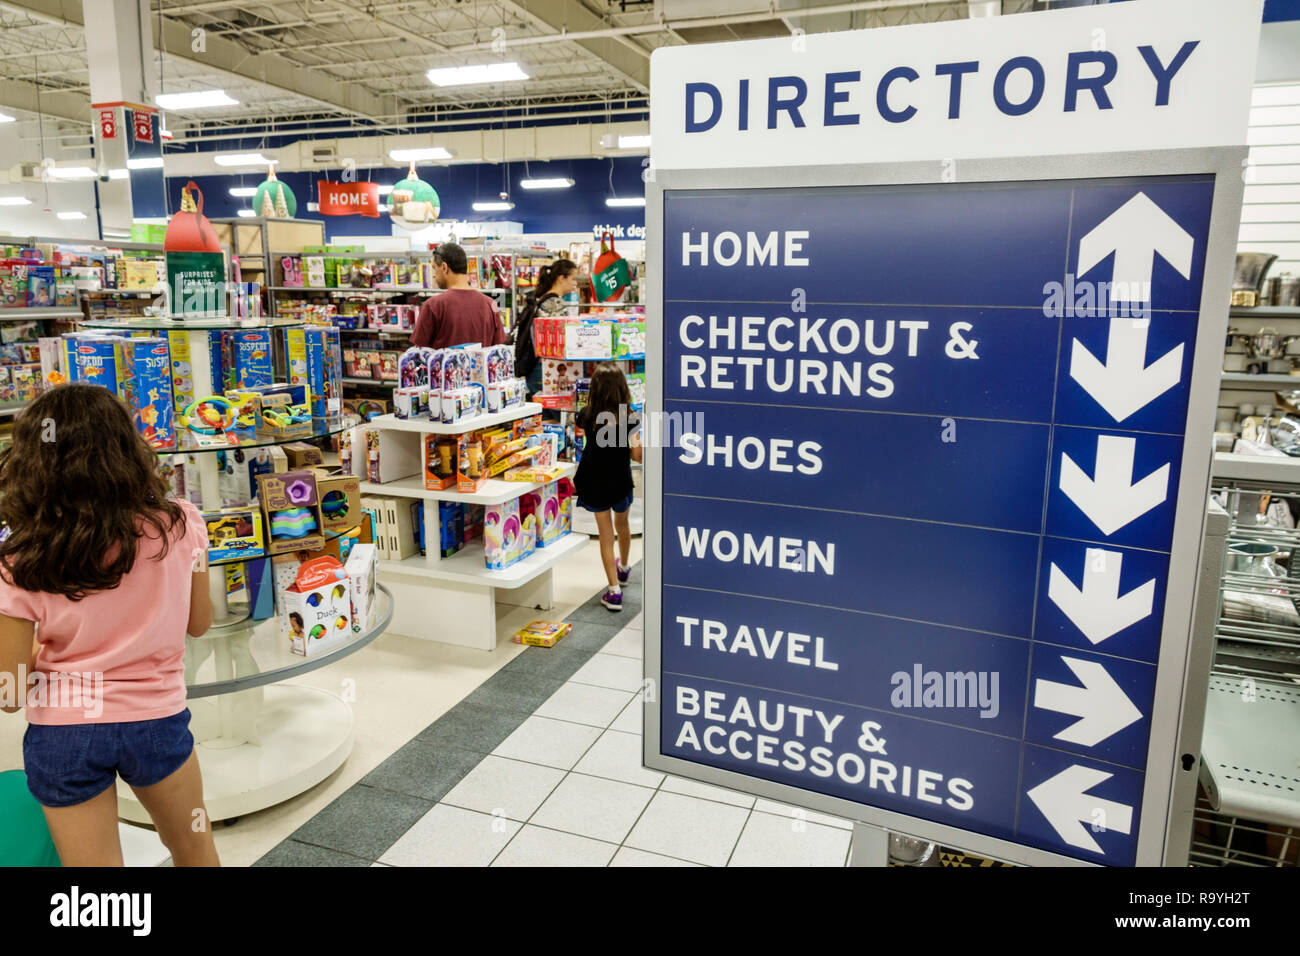 Fort Ft. Lauderdale Florida,Sunrise,Sawgrass Mills mall,Marshalls Discount Department Store,inside interior,display sale,directory sign,departments,FL Stock Photo